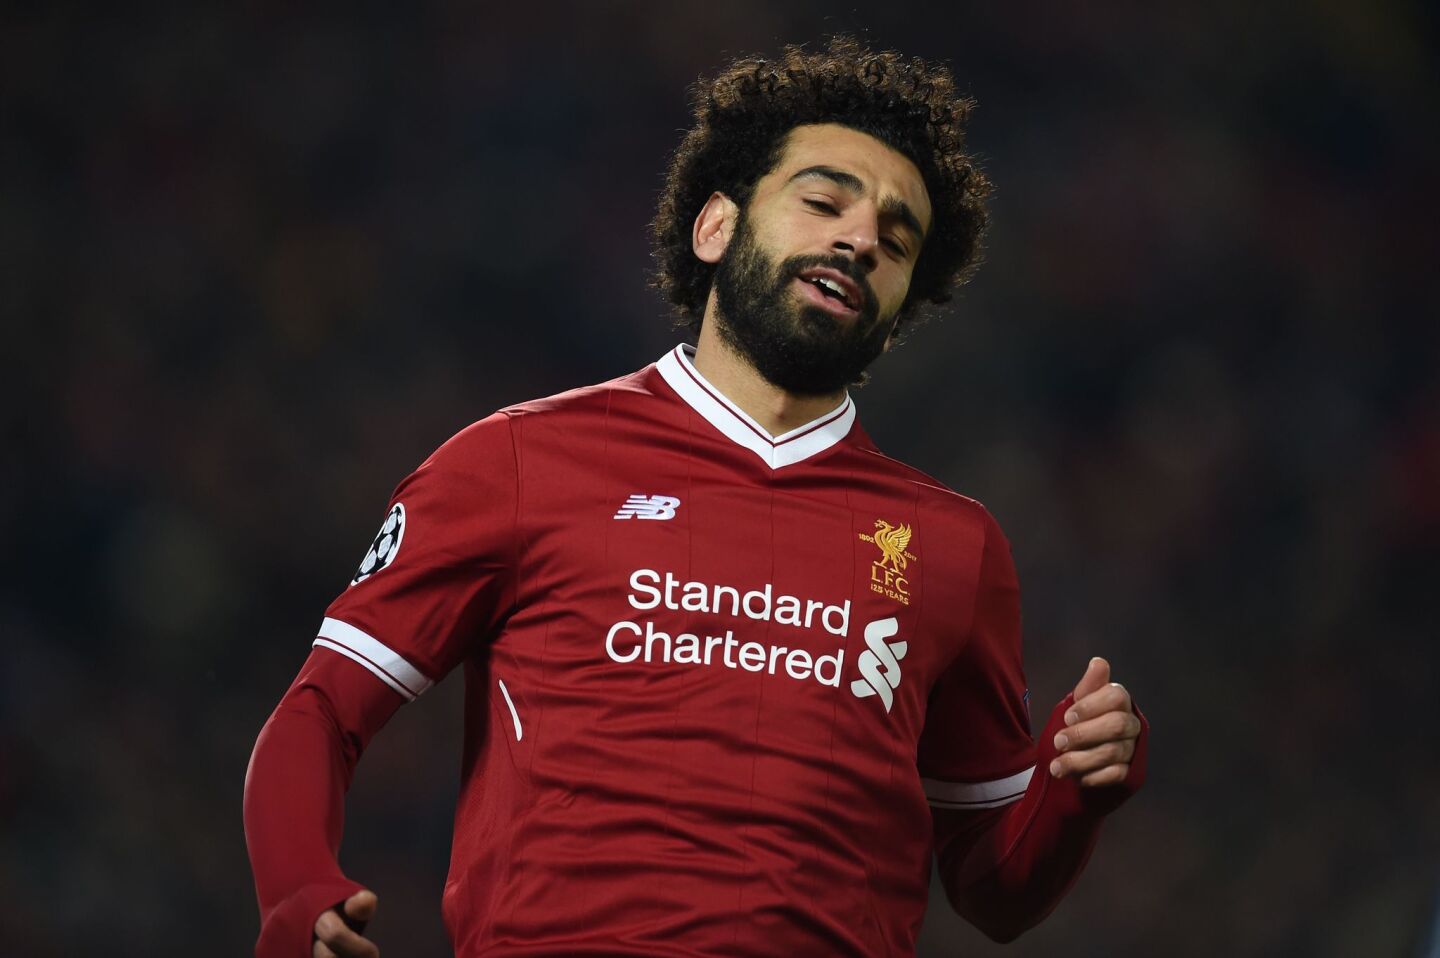 Liverpool's Egyptian midfielder Mohamed Salah gestures during the UEFA Champions League round of sixteen second leg football match between Liverpool and FC Porto at Anfield in Liverpool, north-west England on March 6, 2018. / AFP PHOTO / PAUL ELLISPAUL ELLIS/AFP/Getty Images ** OUTS - ELSENT, FPG, CM - OUTS * NM, PH, VA if sourced by CT, LA or MoD **